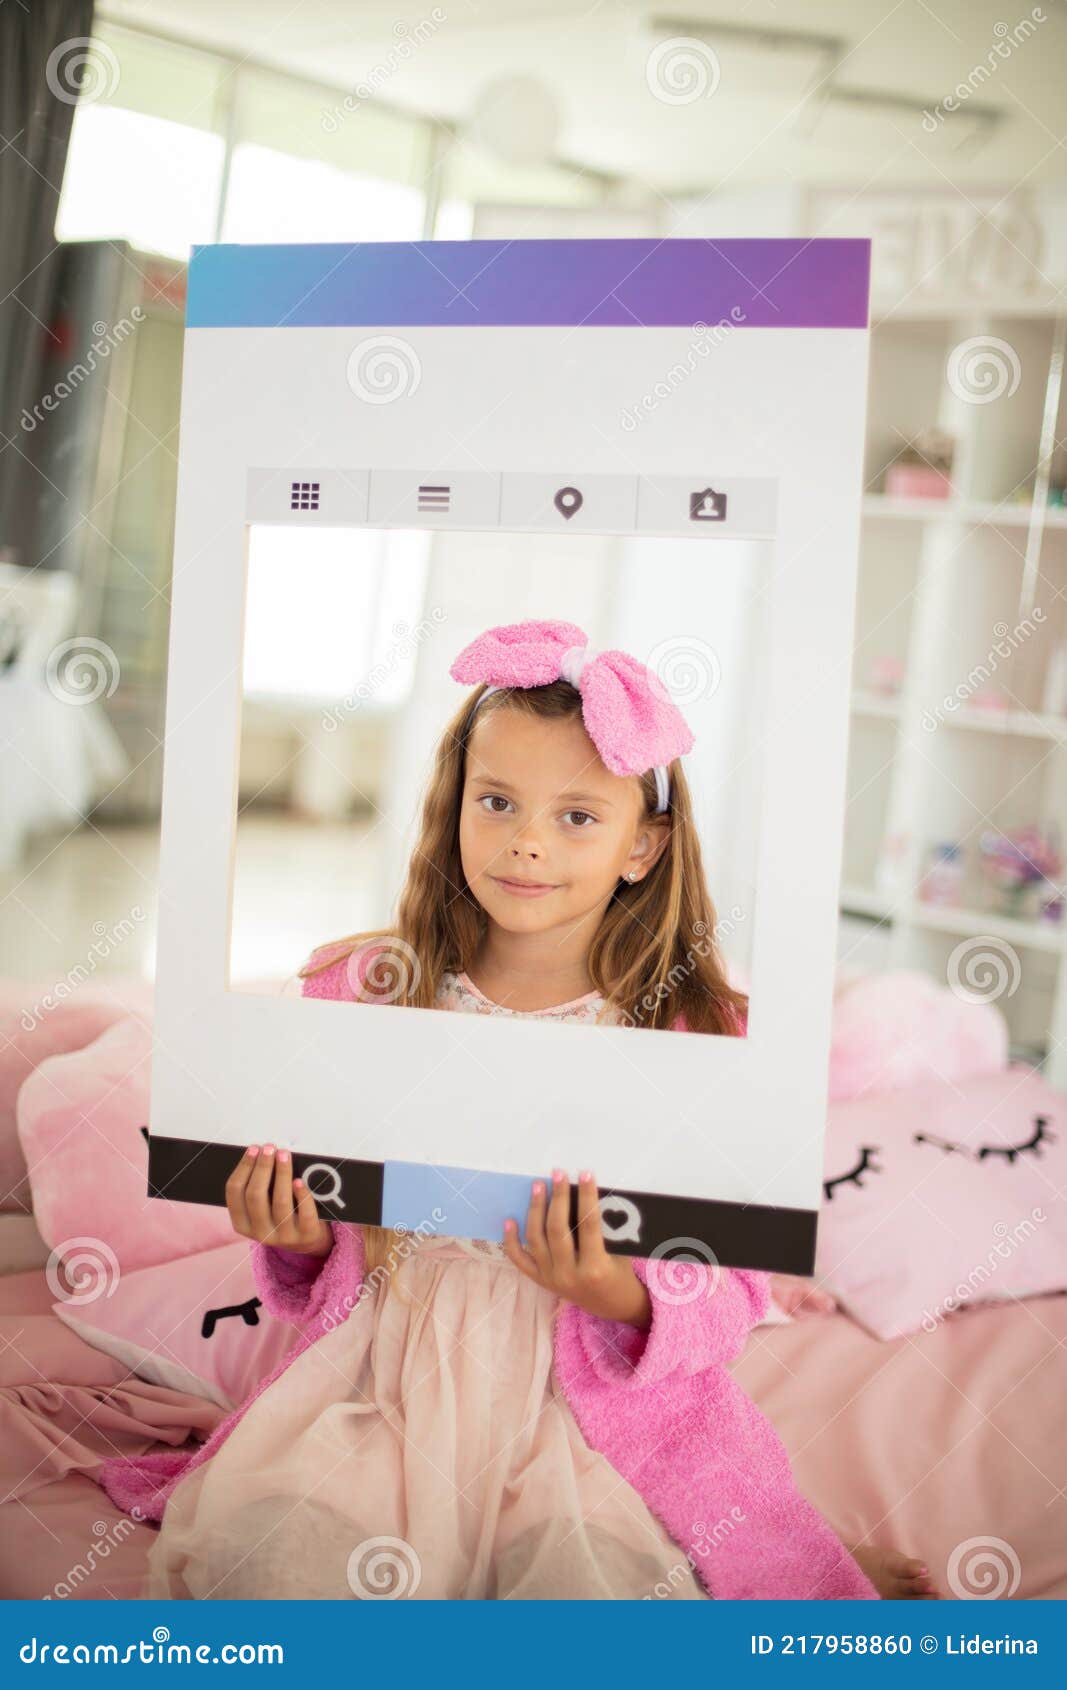 little girl sitting on bed in bathrobe and lookin g at camera. holding the frame